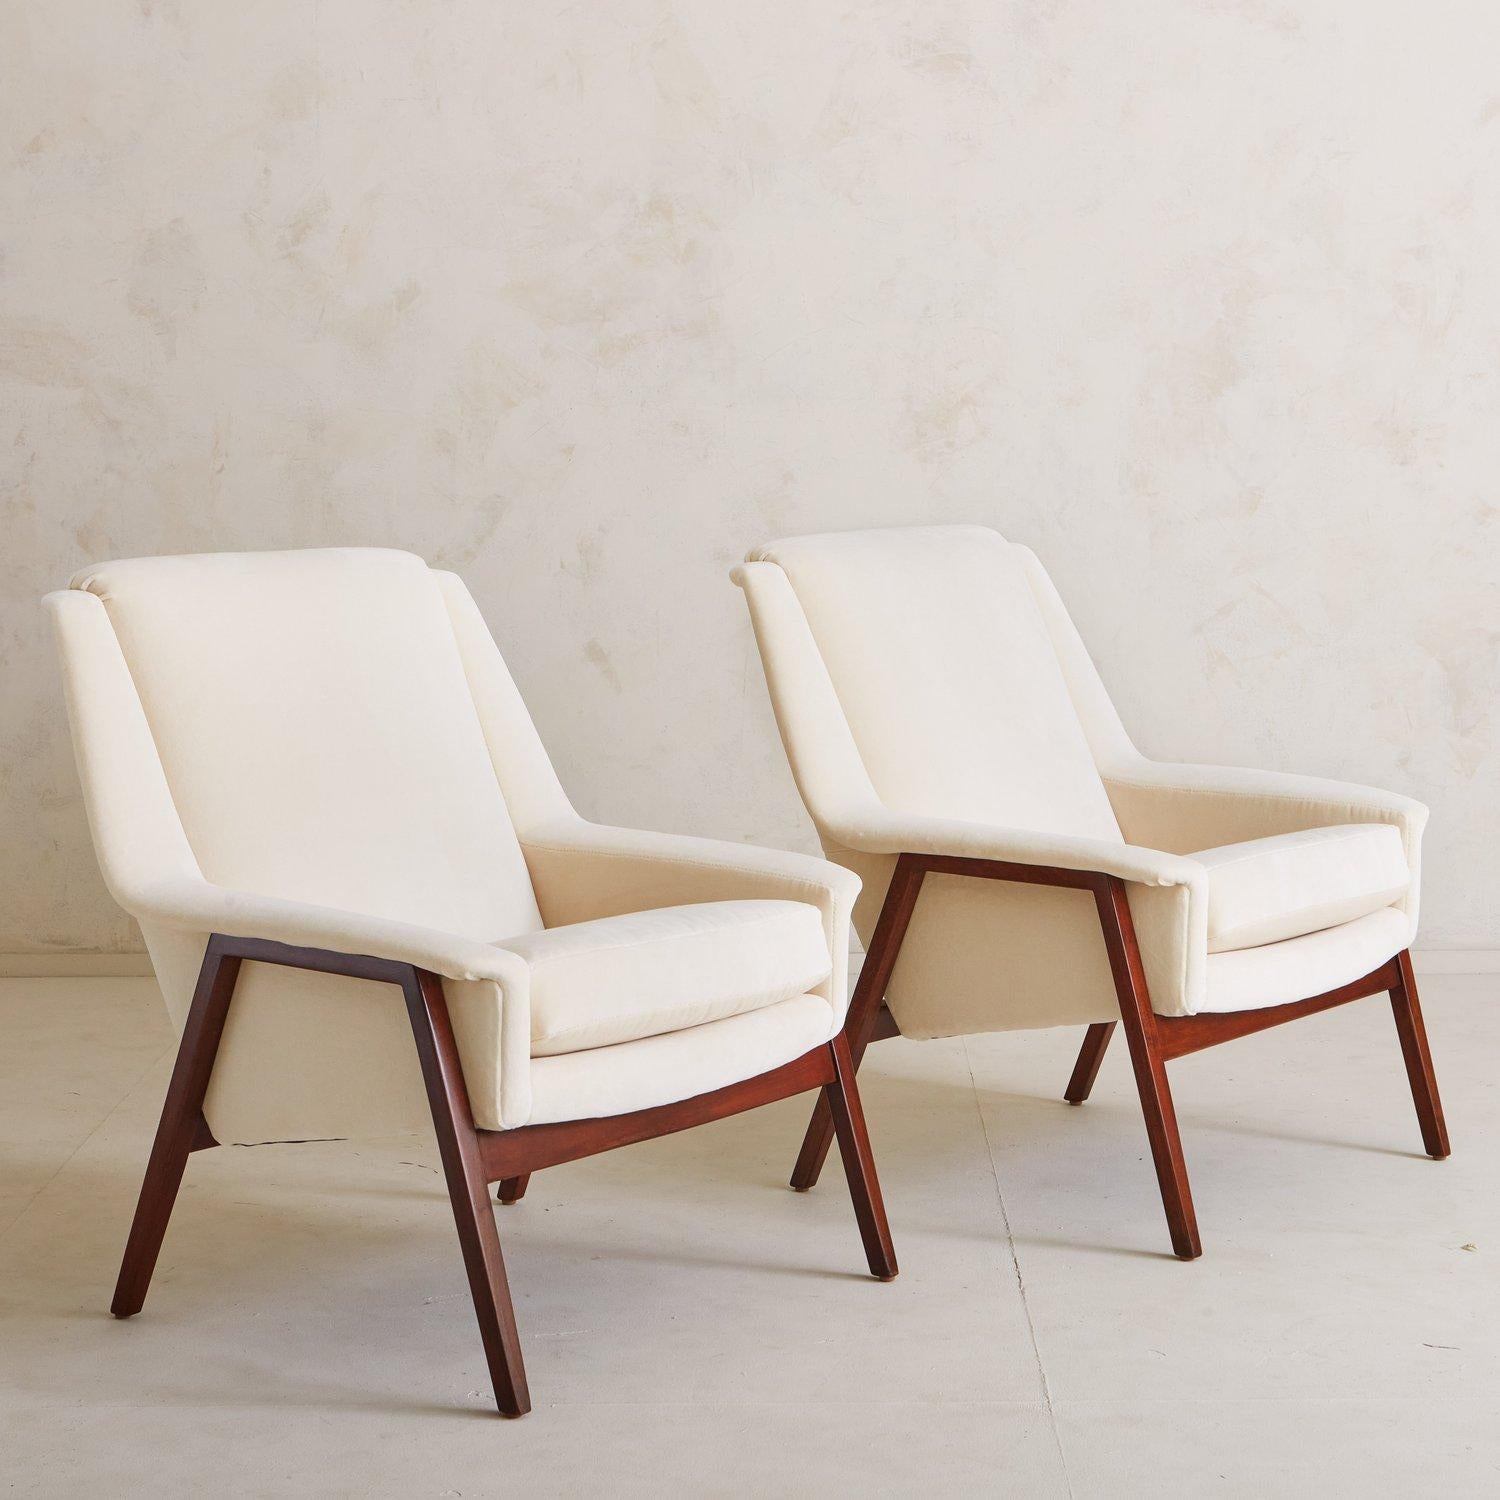 A timeless pair of accent chairs sourced in Italy, 1950s. These chairs feature angular seats freshly reupholstered in a white cotton velvet, which contrast beautifully with the stained maple frames.